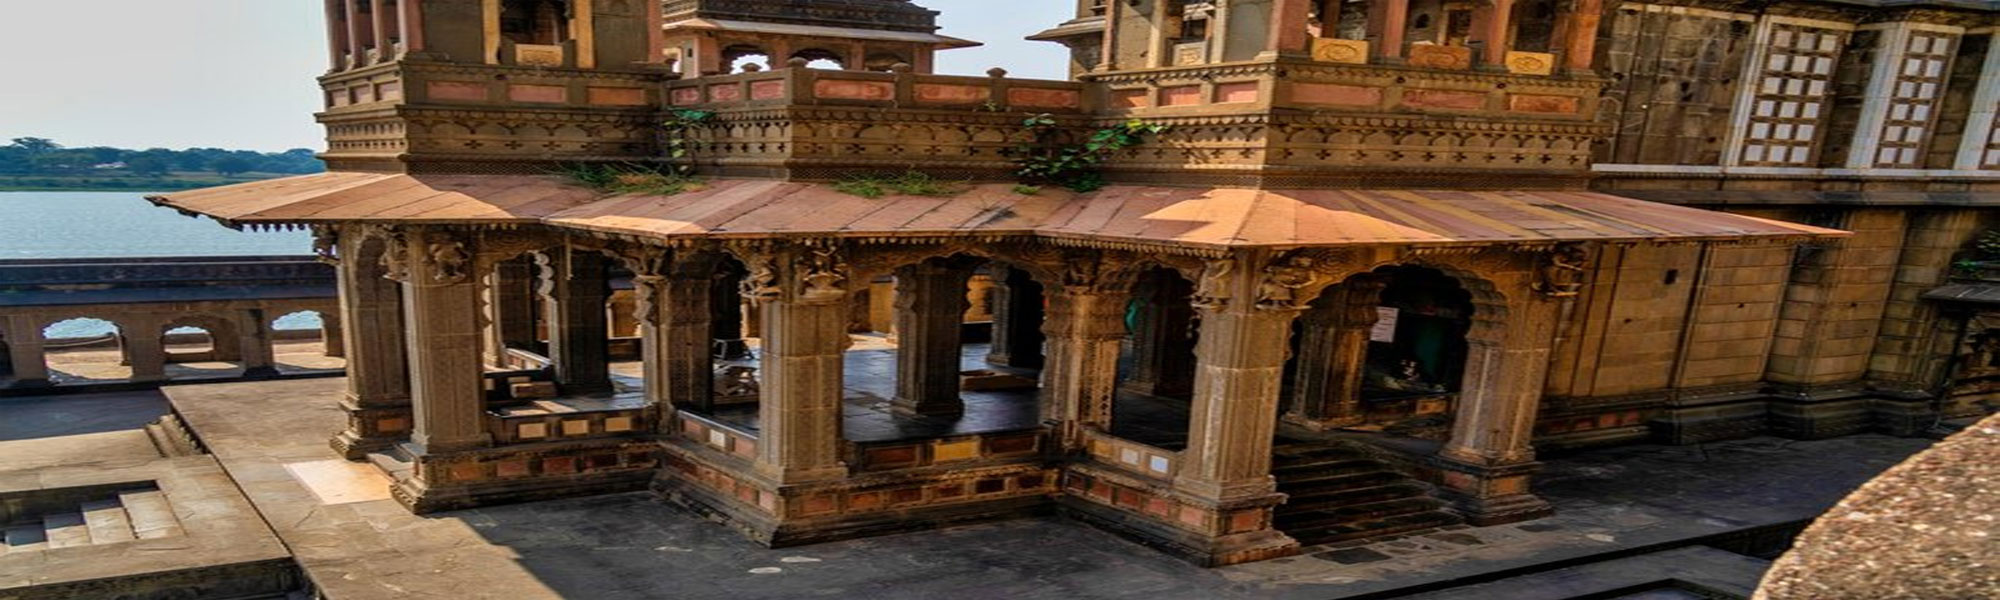 Heritage Haveli Tours in India with Fort and Palaces Tours in India